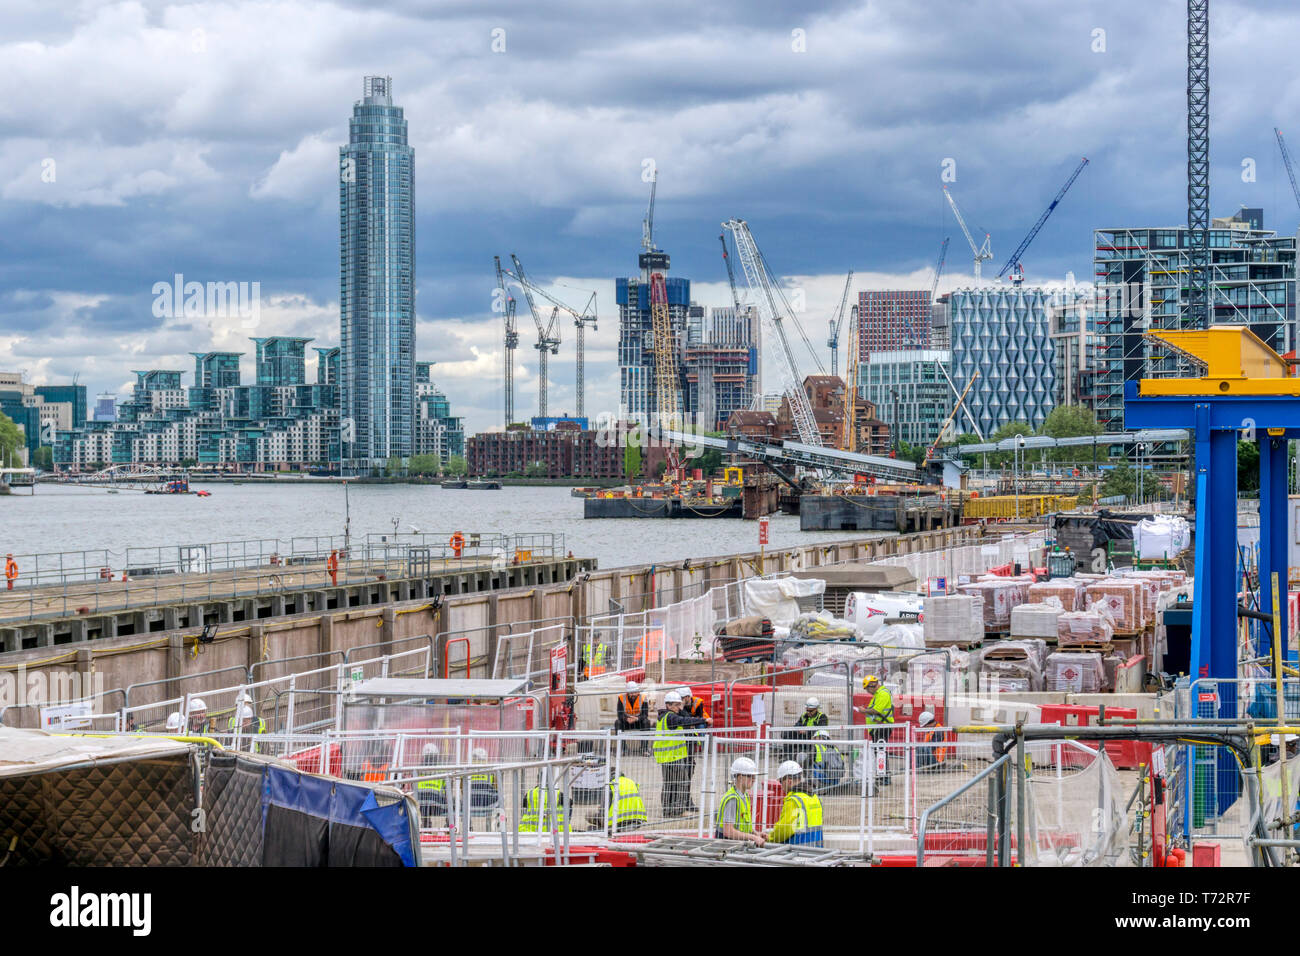 Building works on the Battersea Power Station development beside the River Thames, with St George Wharf & Vauxhall Tower in background. Stock Photo